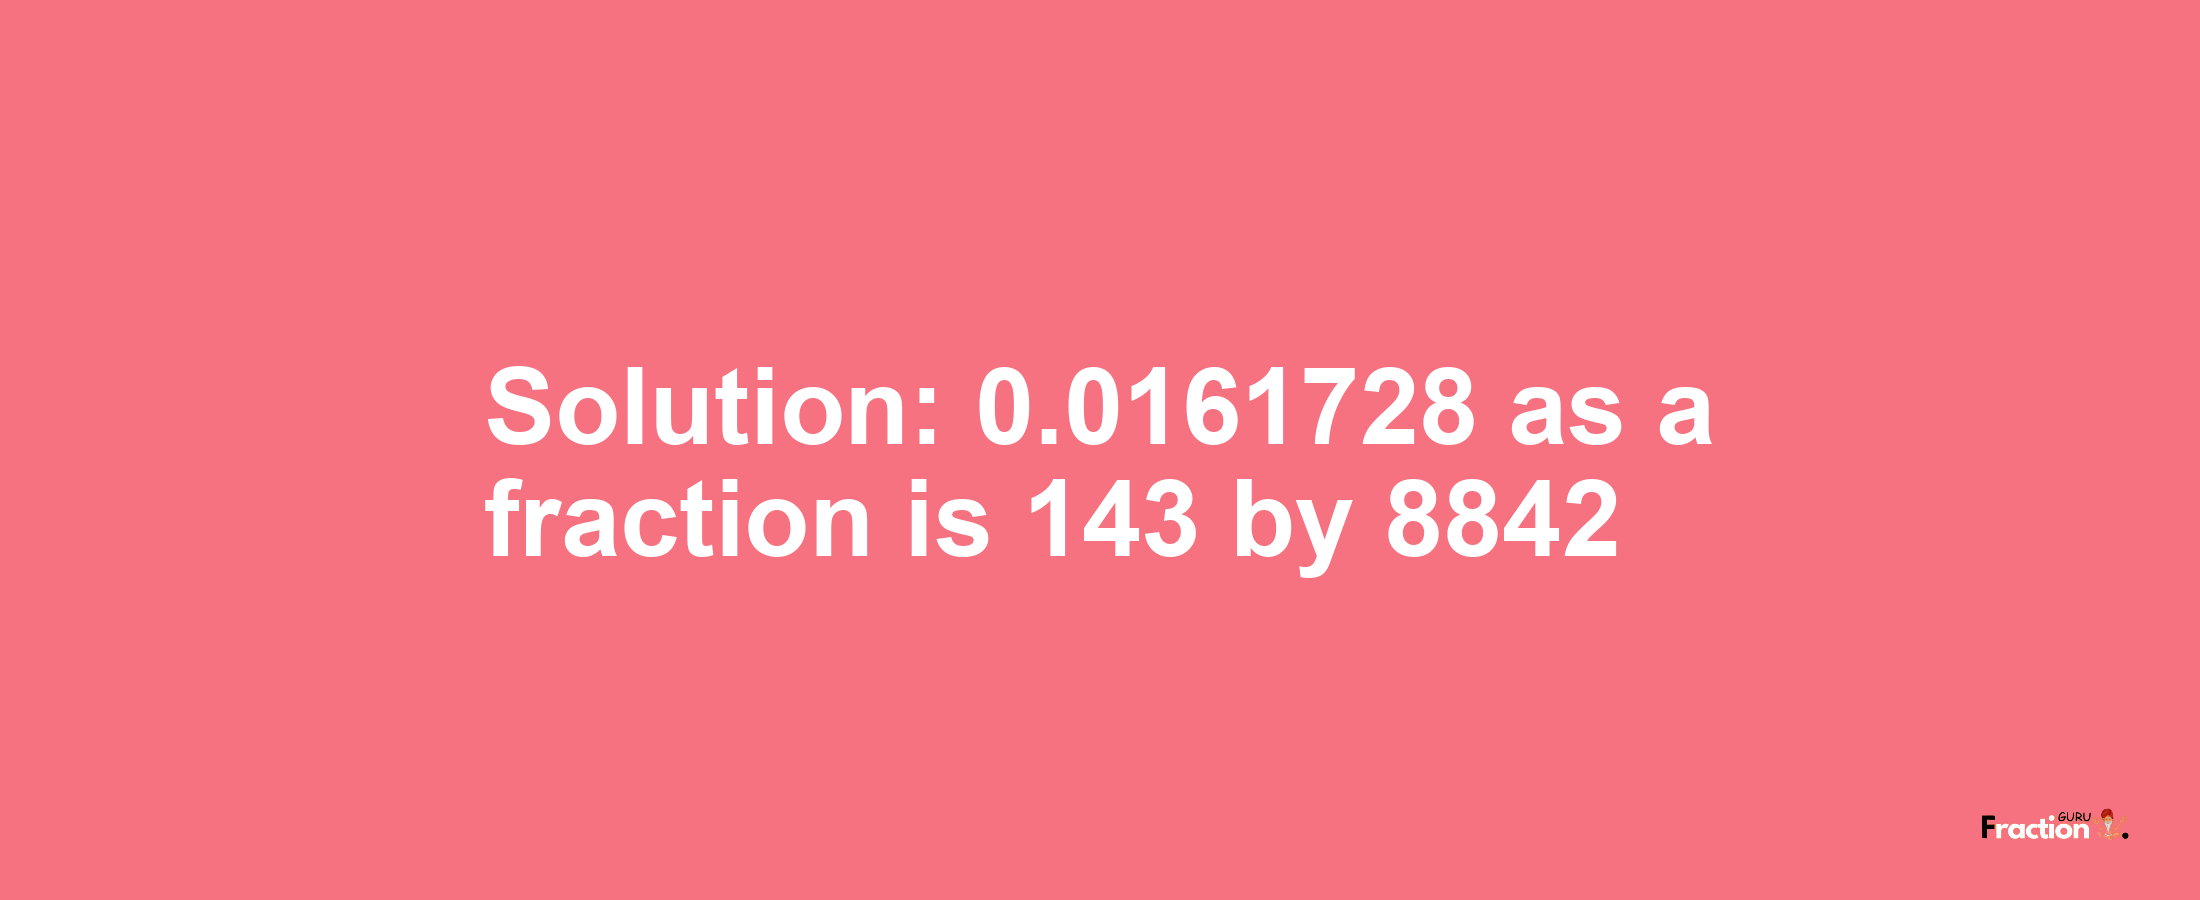 Solution:0.0161728 as a fraction is 143/8842